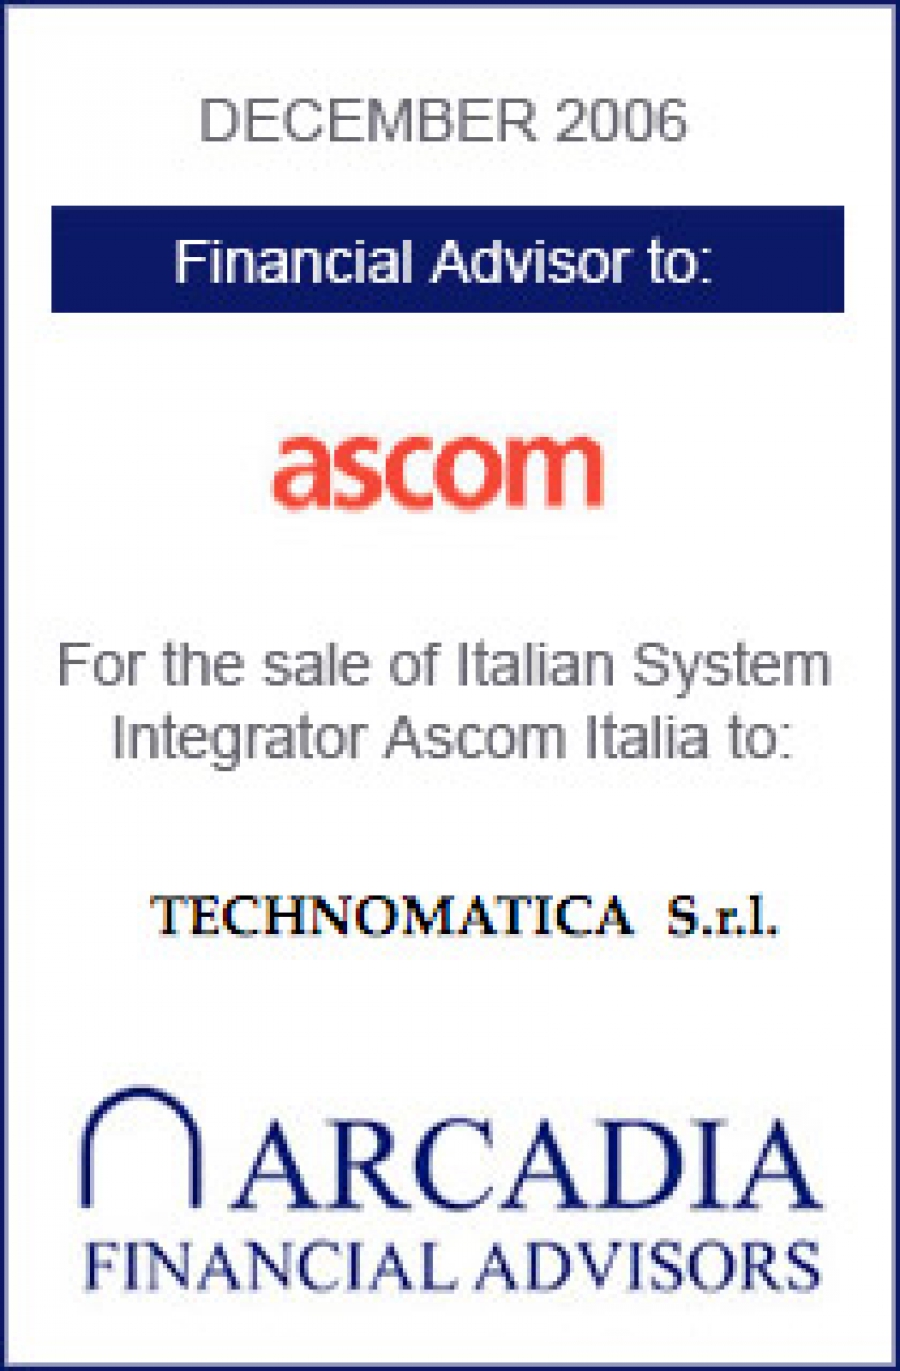 Transaction completed with Ascom